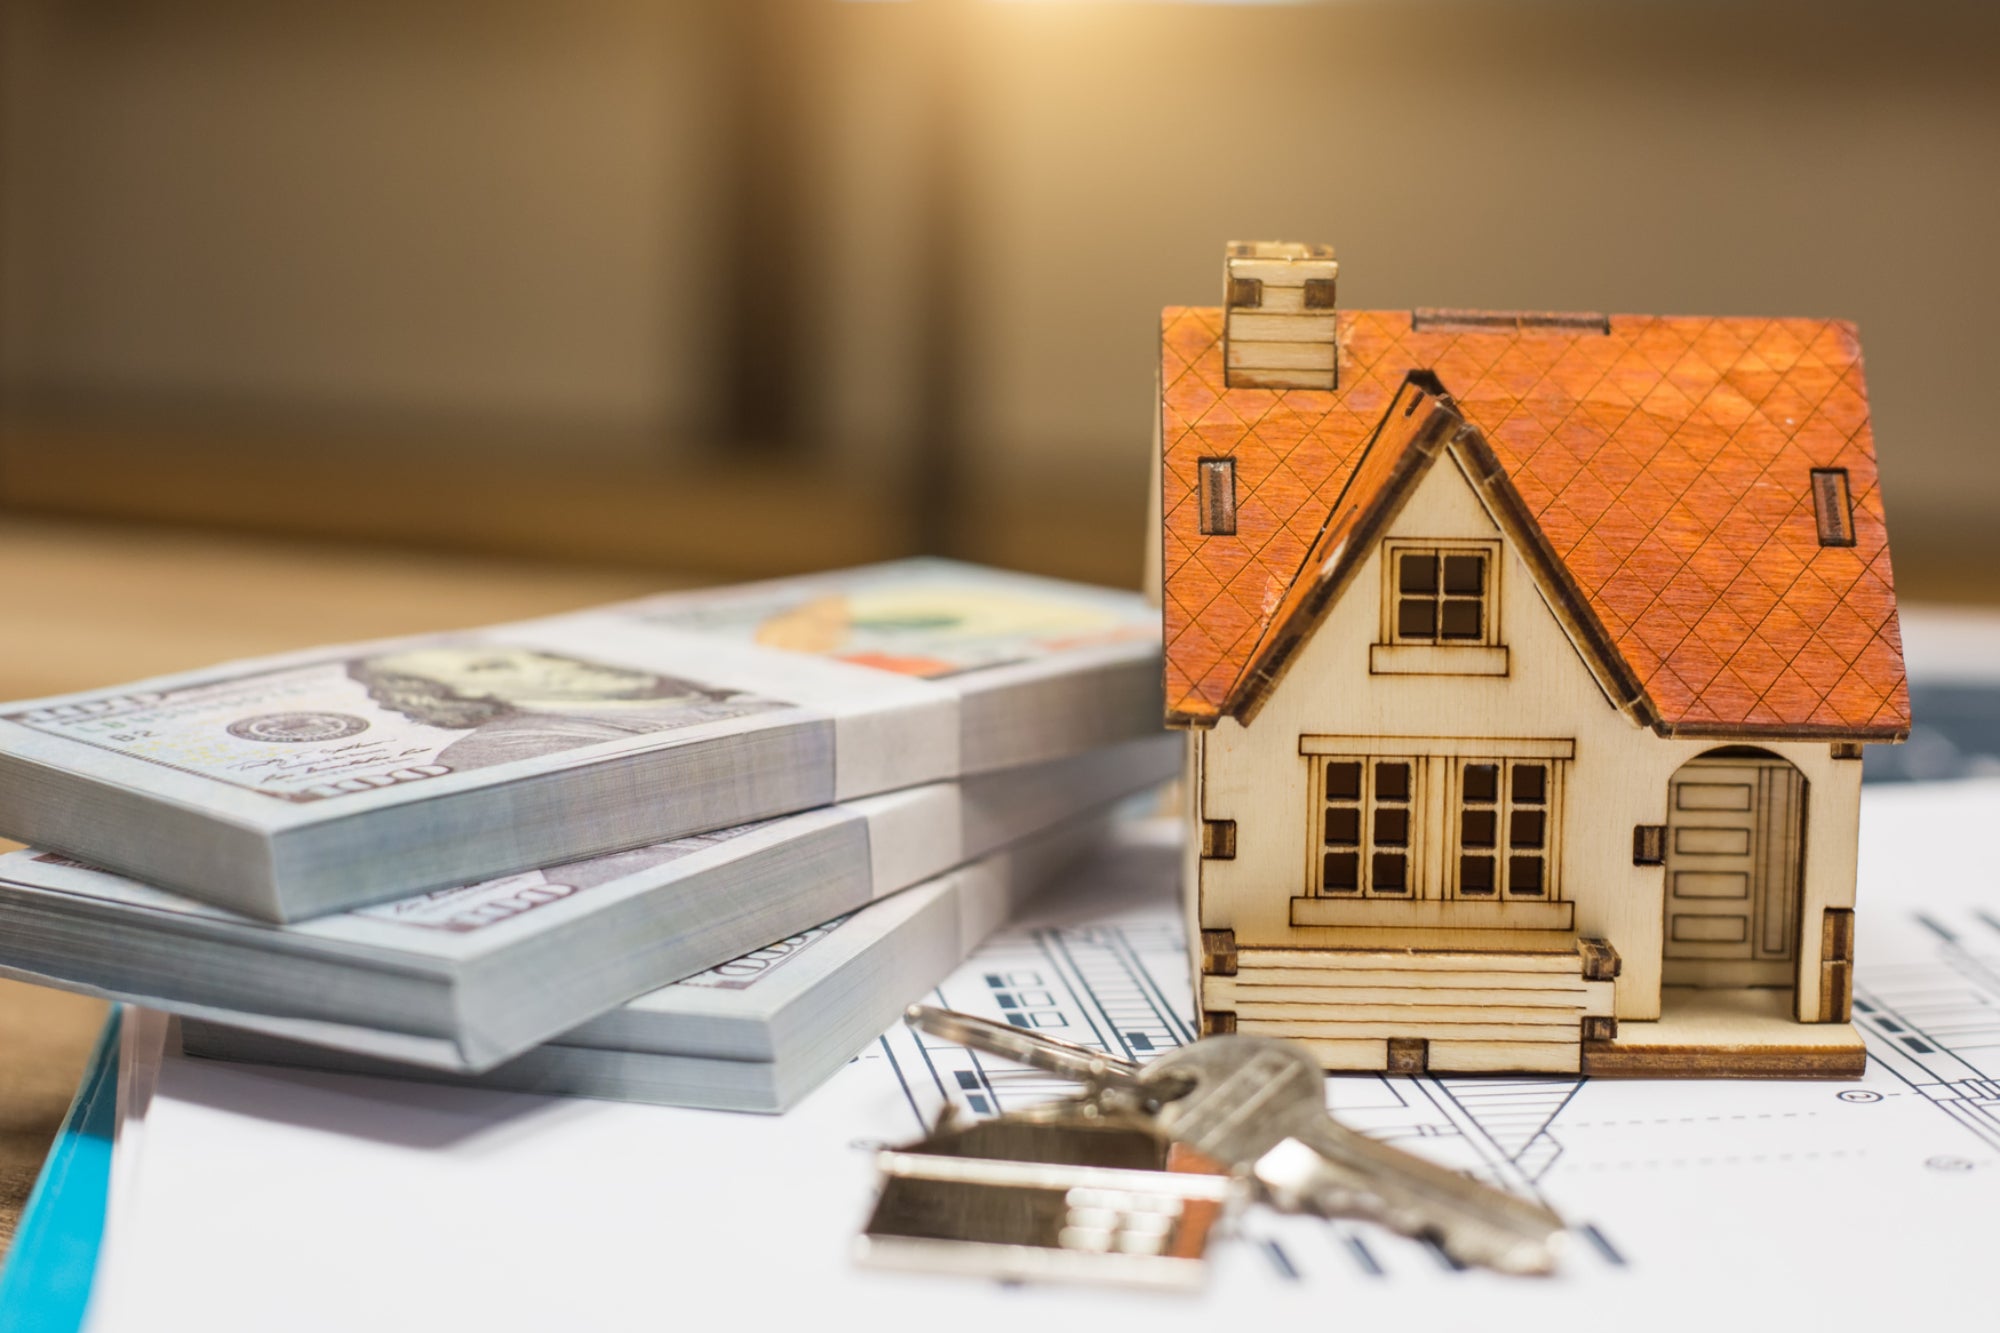 How To Sell A House That Is Part Of A Probate Process